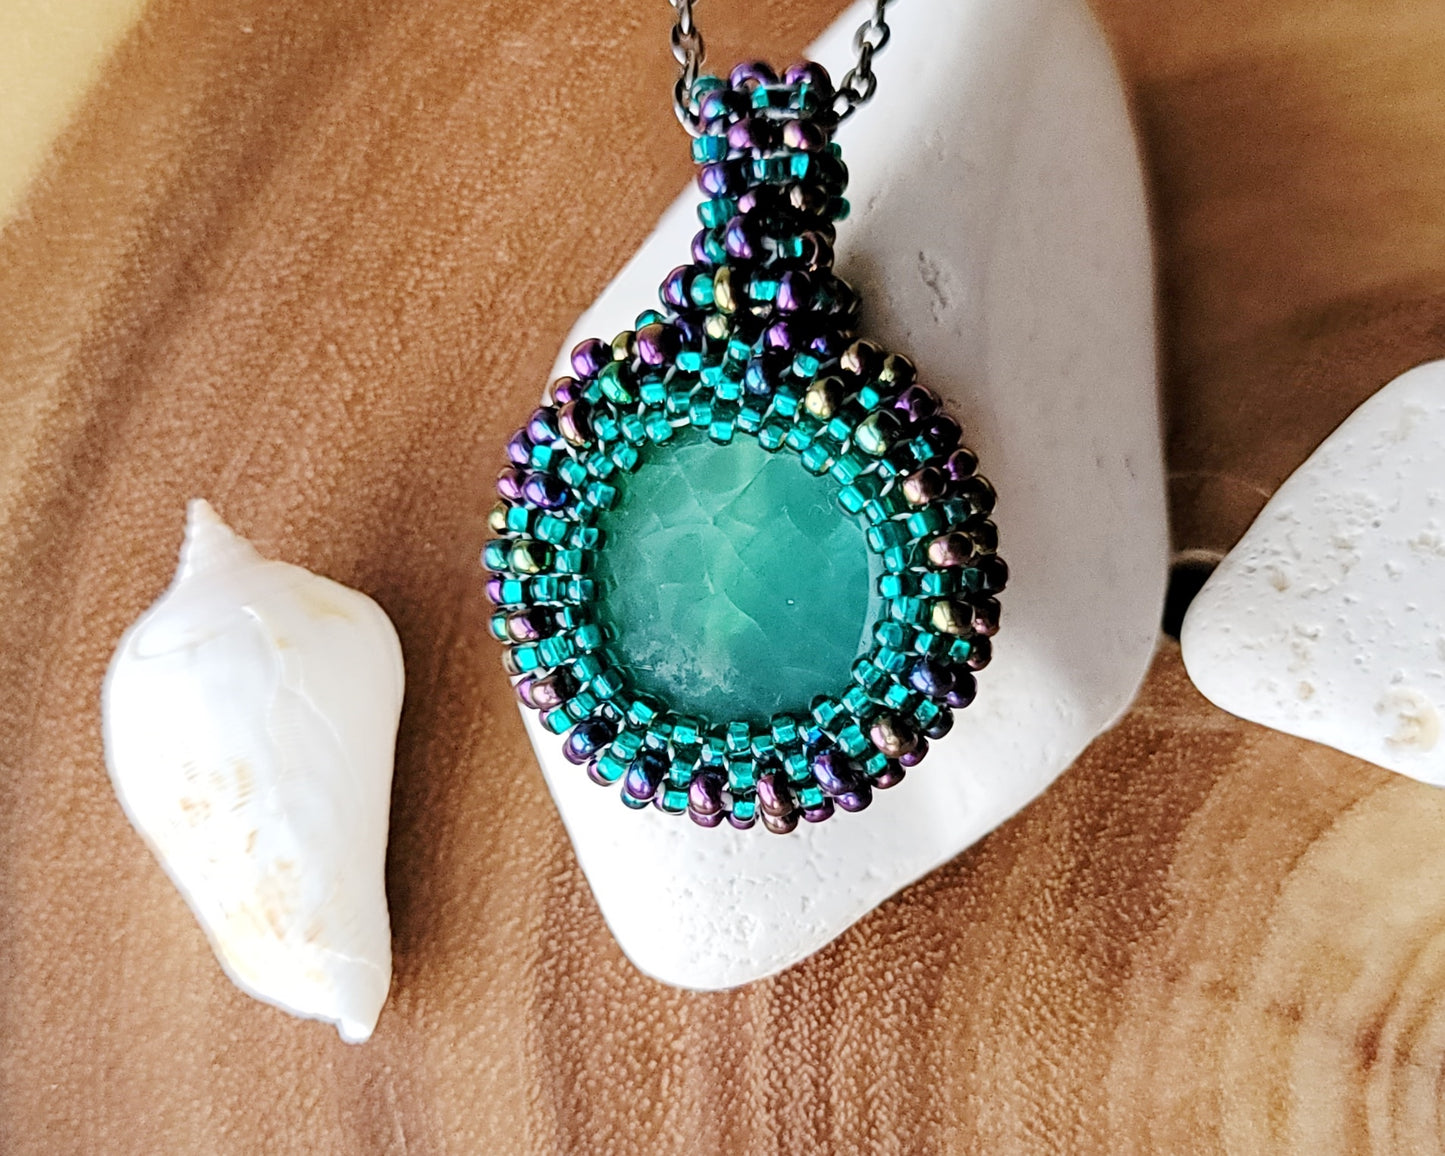 Excitement and Joy Beaded Agate Pendant, One of a kind Beaded Green Agate Pendant, metallic blue & teal green glass seed beads